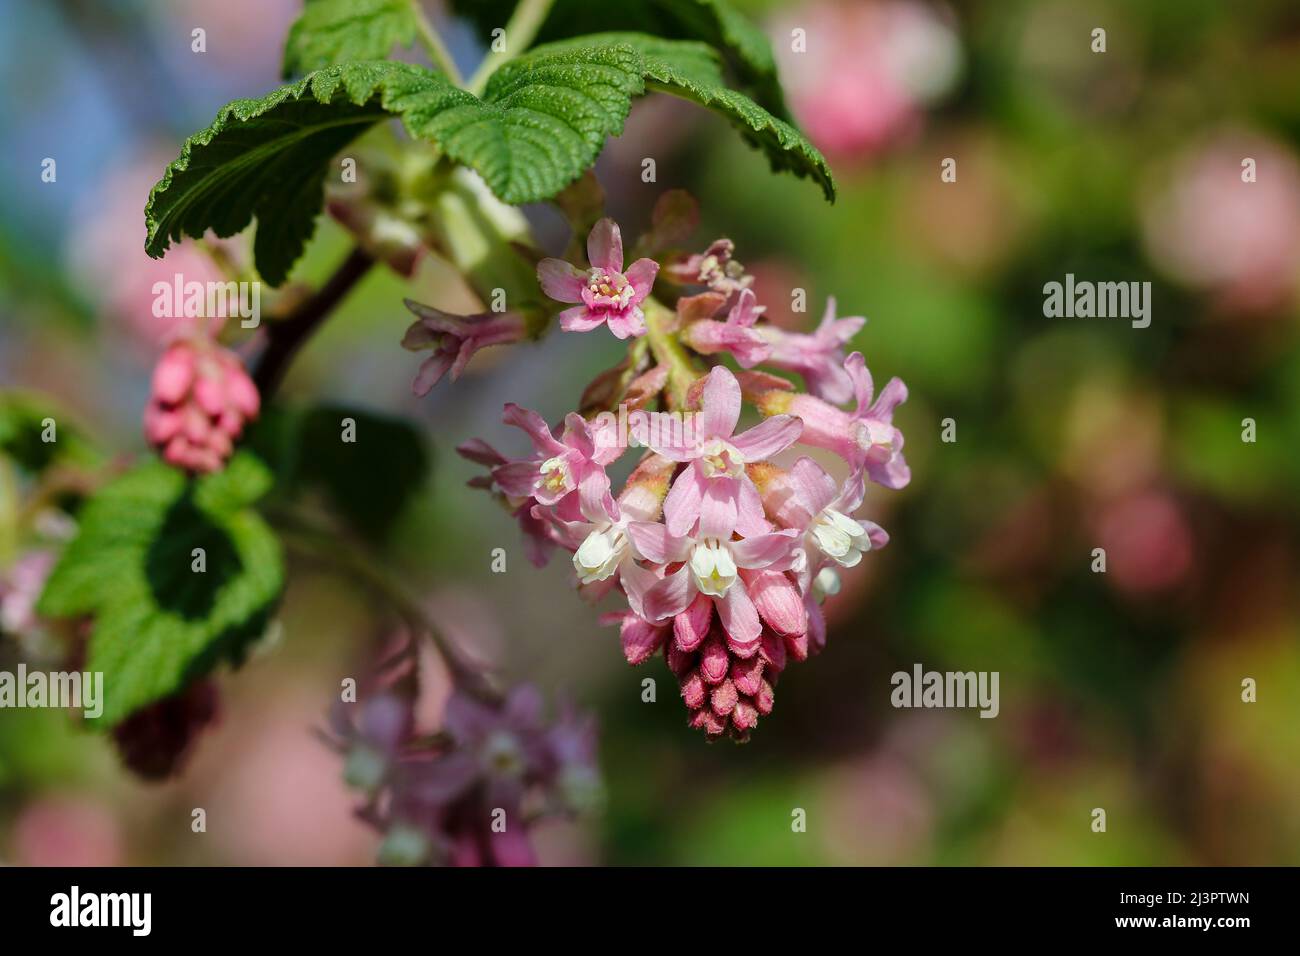 Pink flowers of 'Ribes sanguineum' or flowering currant plant. Also  'redflower currant', 'red-flowering currant' and 'red currant'. Dublin, Ireland Stock Photo